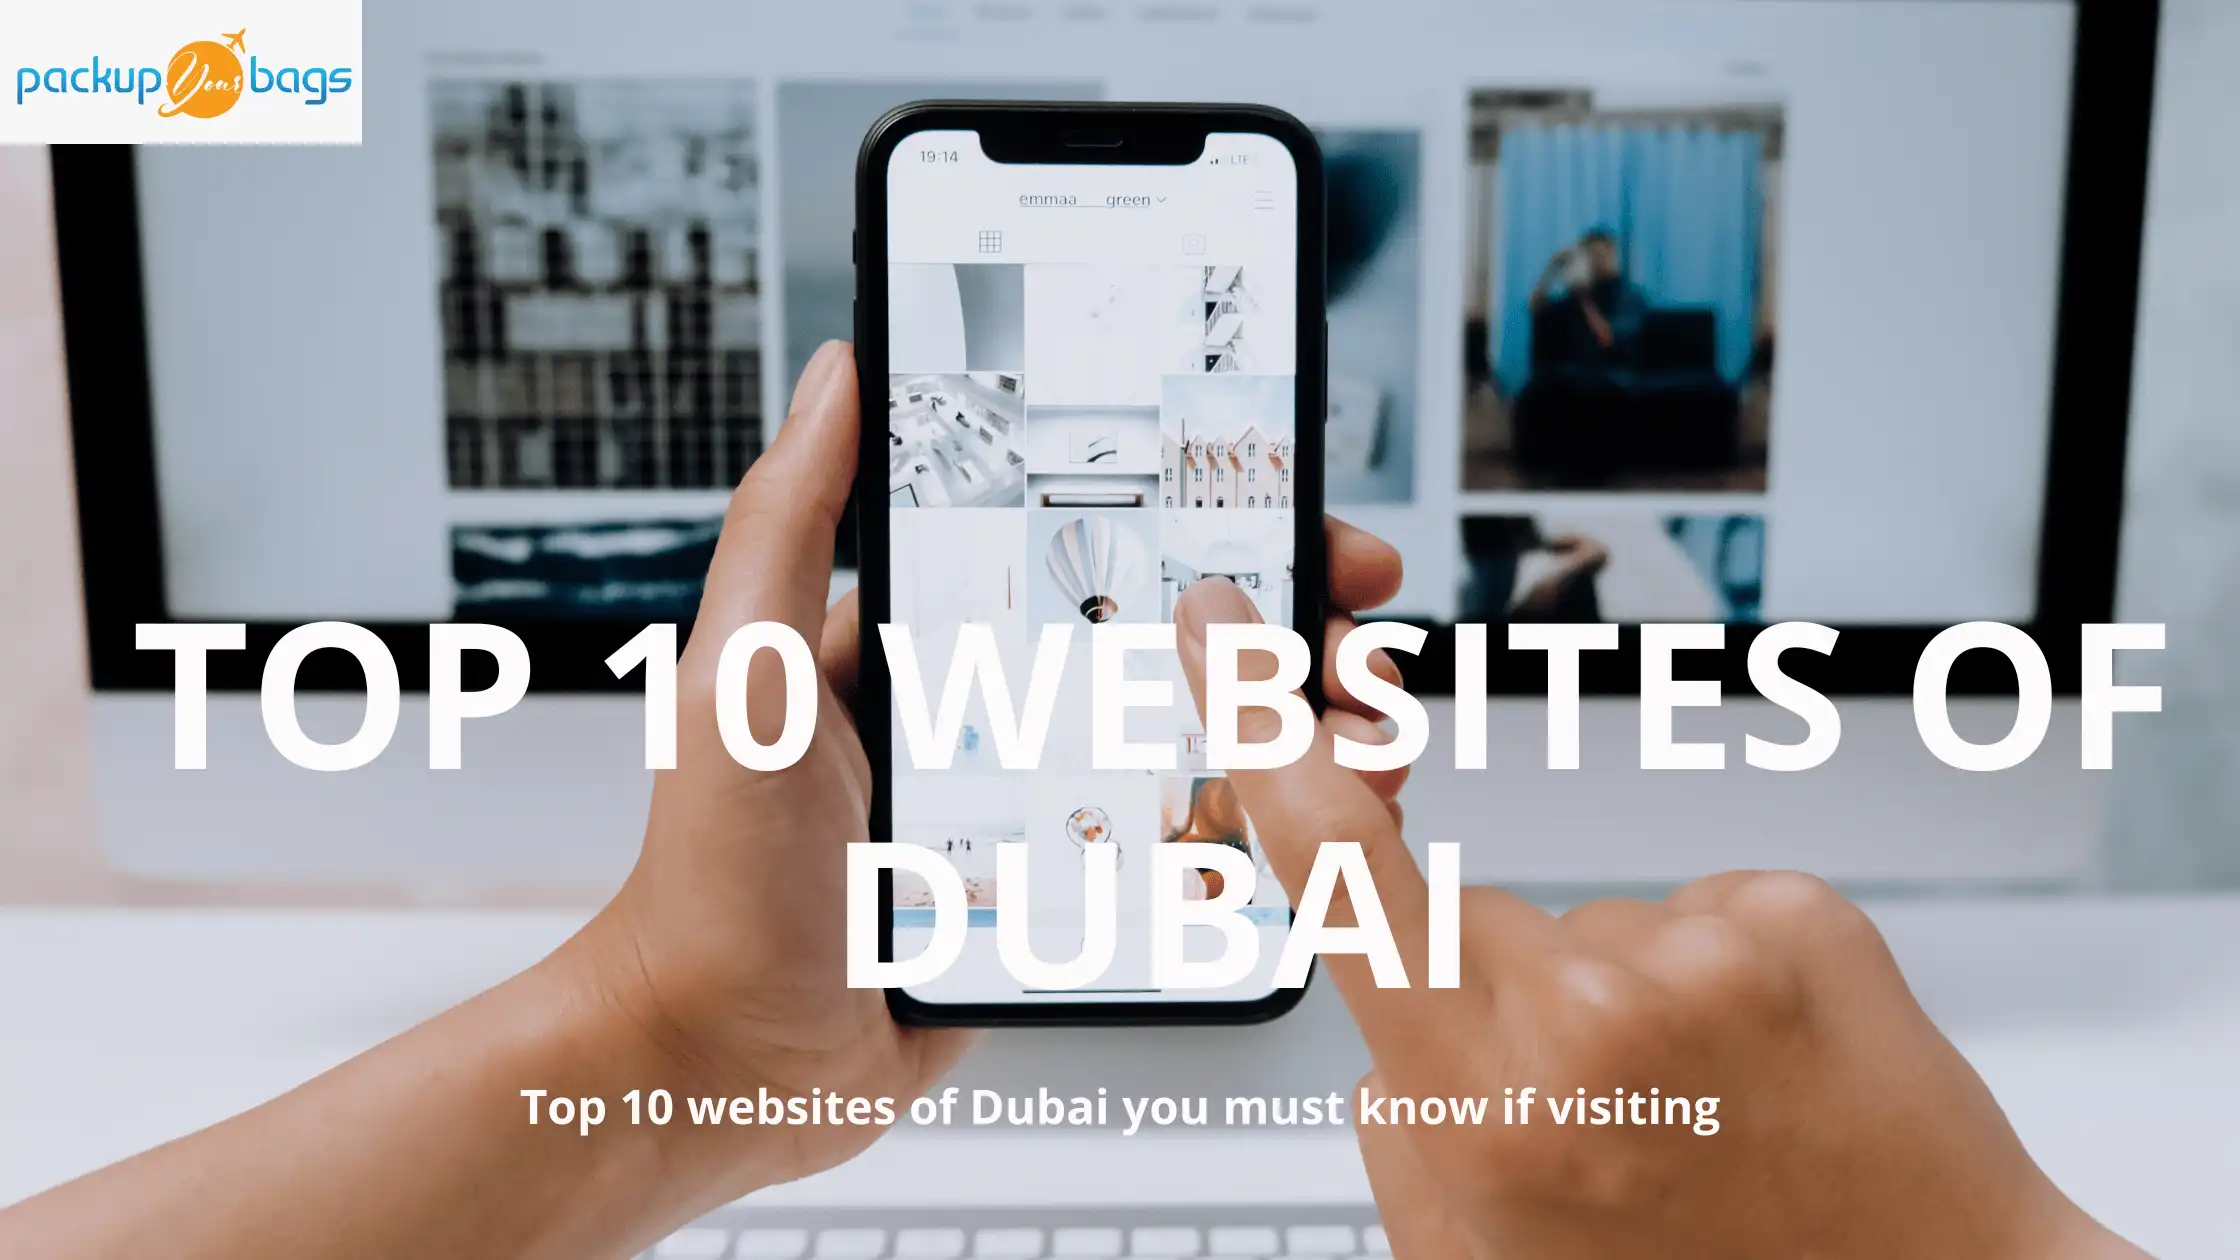 Top 10 websites of Dubai you must know if visiting